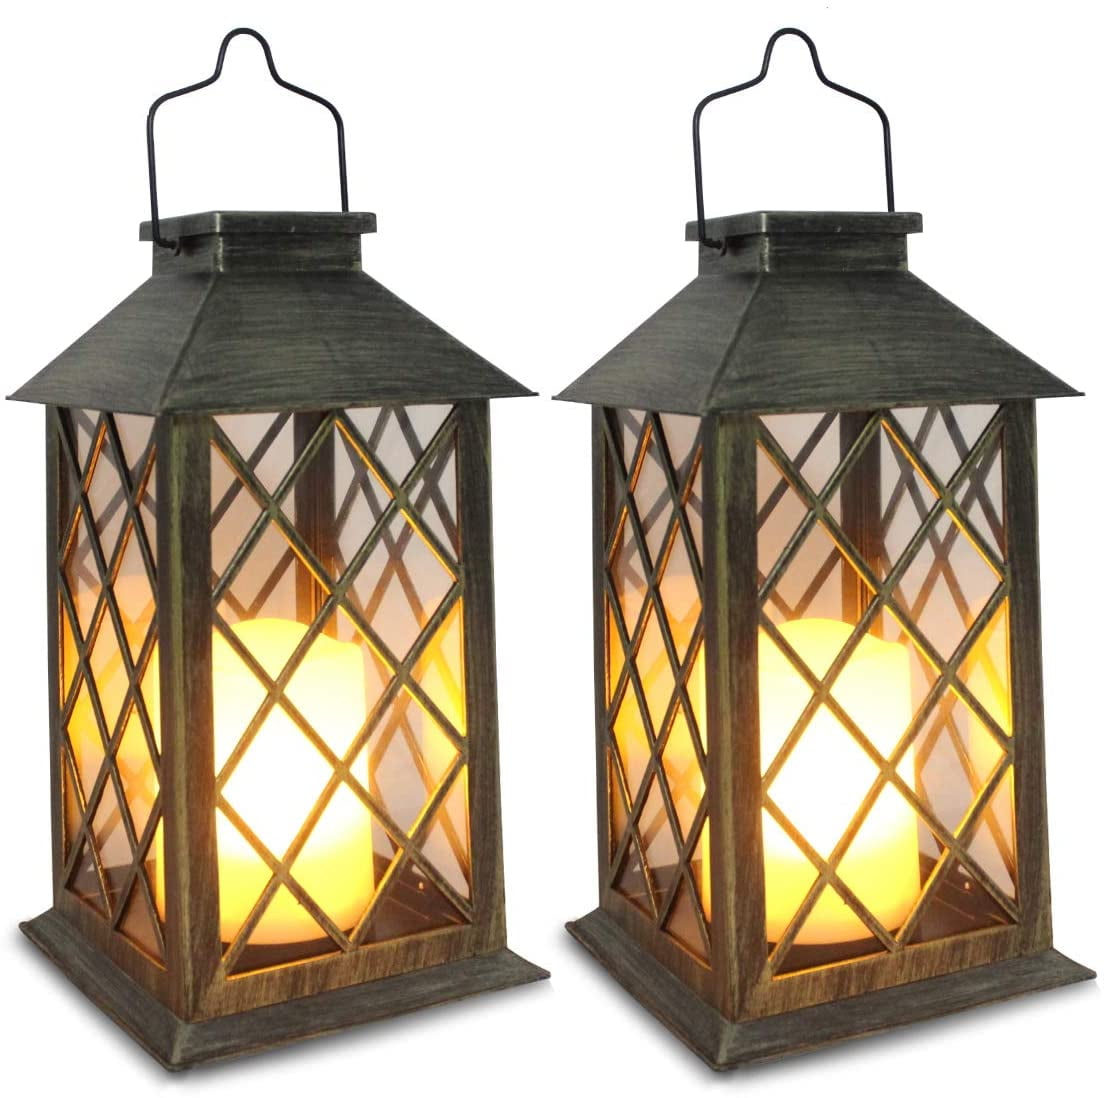 OxyLED 1 Pack Hanging Solar Lantern with Handle Decorative Solar Garden Lanterns with Retro Design for Patio Garden Pathway Party Christmas Decorations Sale Clearance Solar Lanterns Outdoor